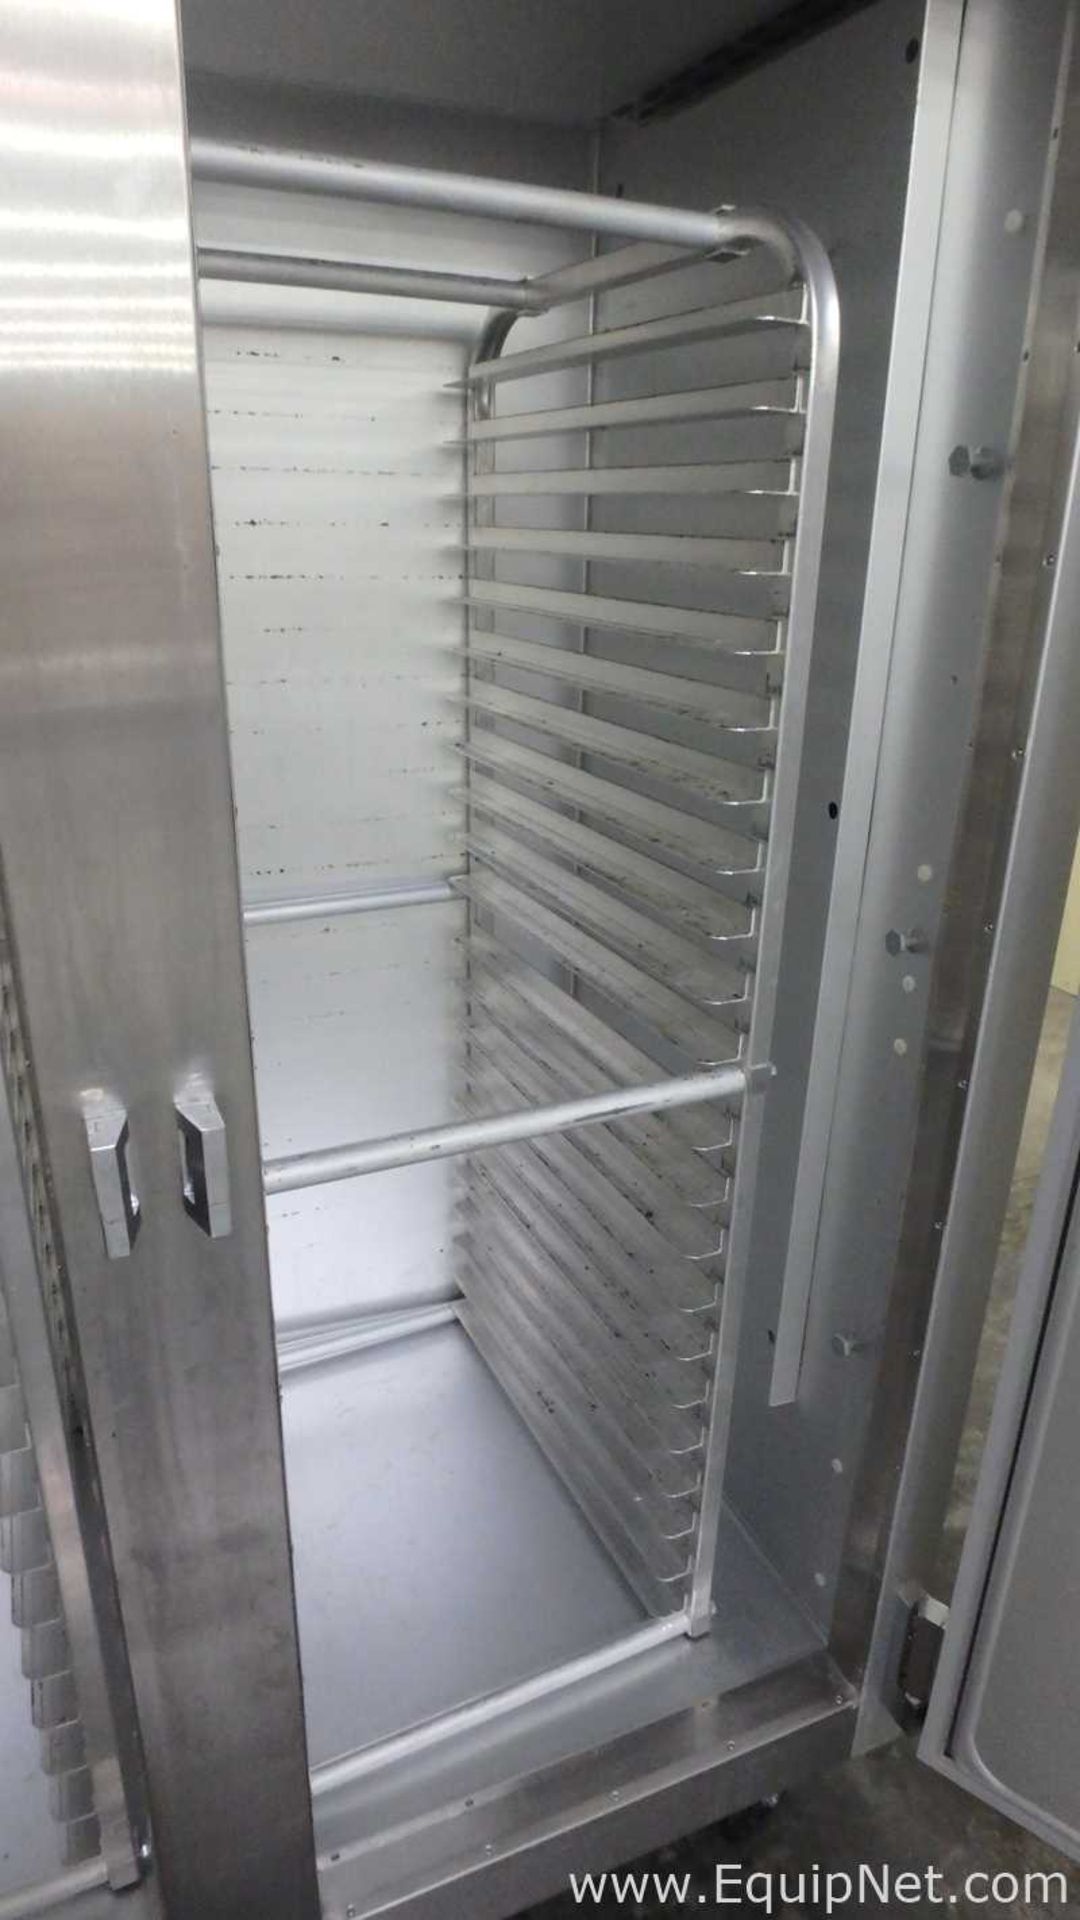 Traulsen G20010 52in 2-Section Solid Door Reach-In Refrigerator Left-Right Hinged Doors 46cuft - Image 5 of 12